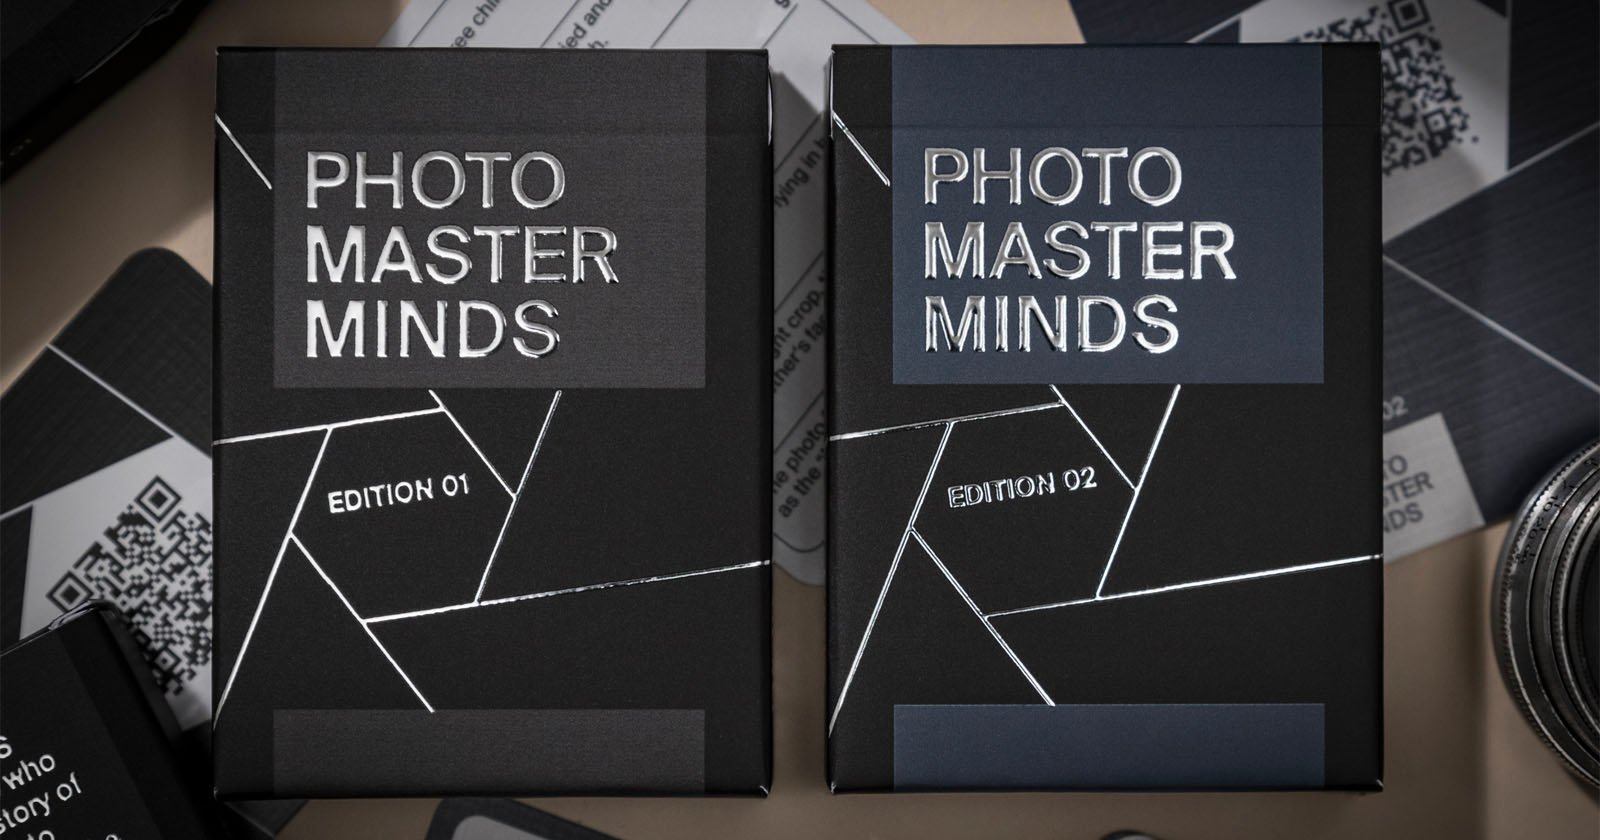 Two boxes labeled Photo Master Minds Edition 01 and Edition 02 with geometric designs, lying among various photographic equipment.